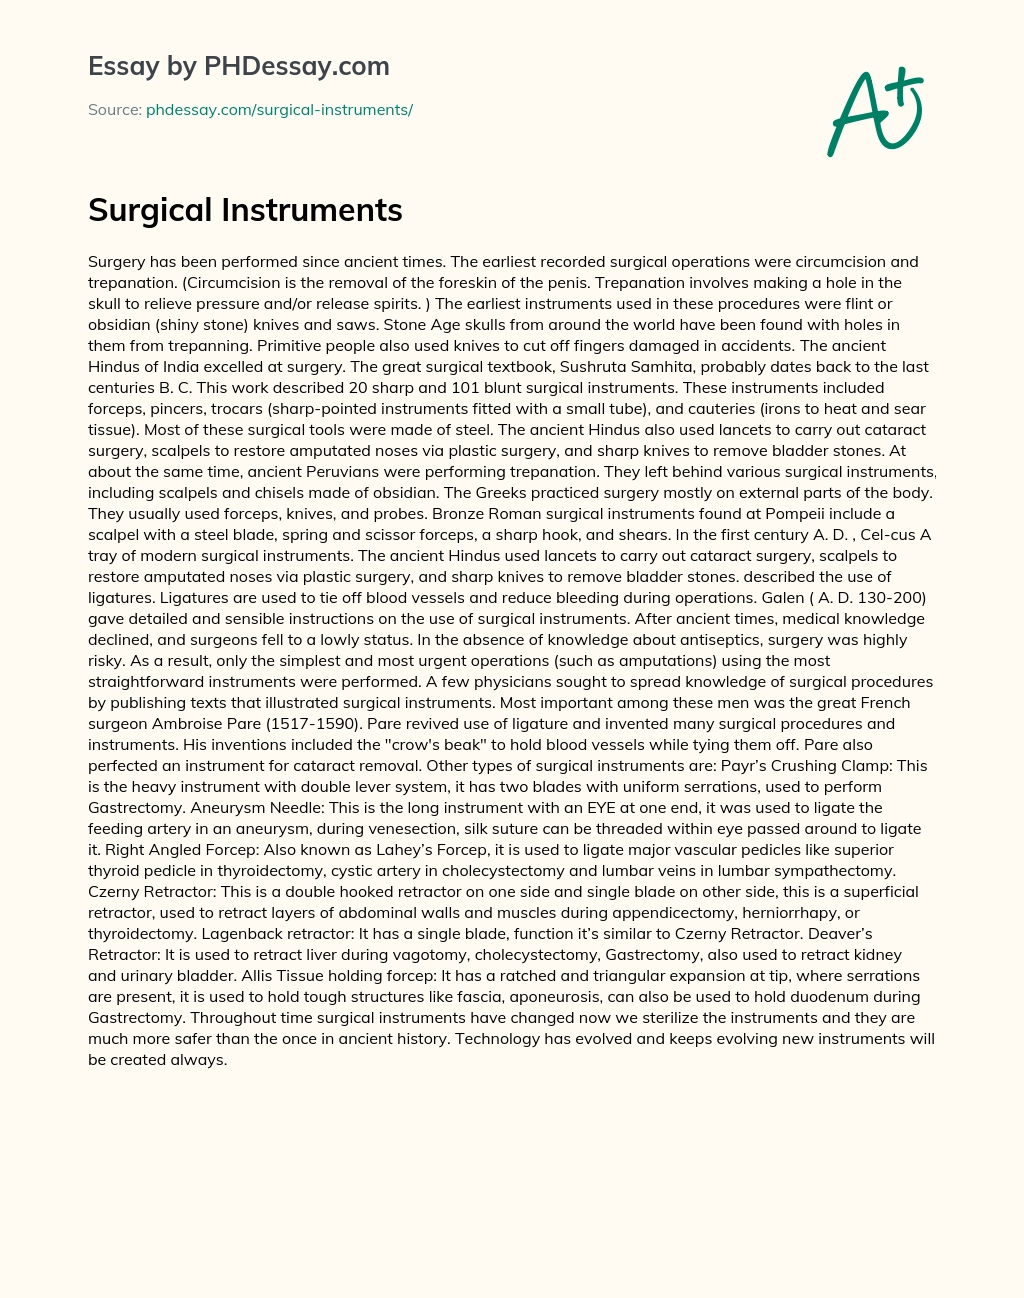 Surgical Instruments essay